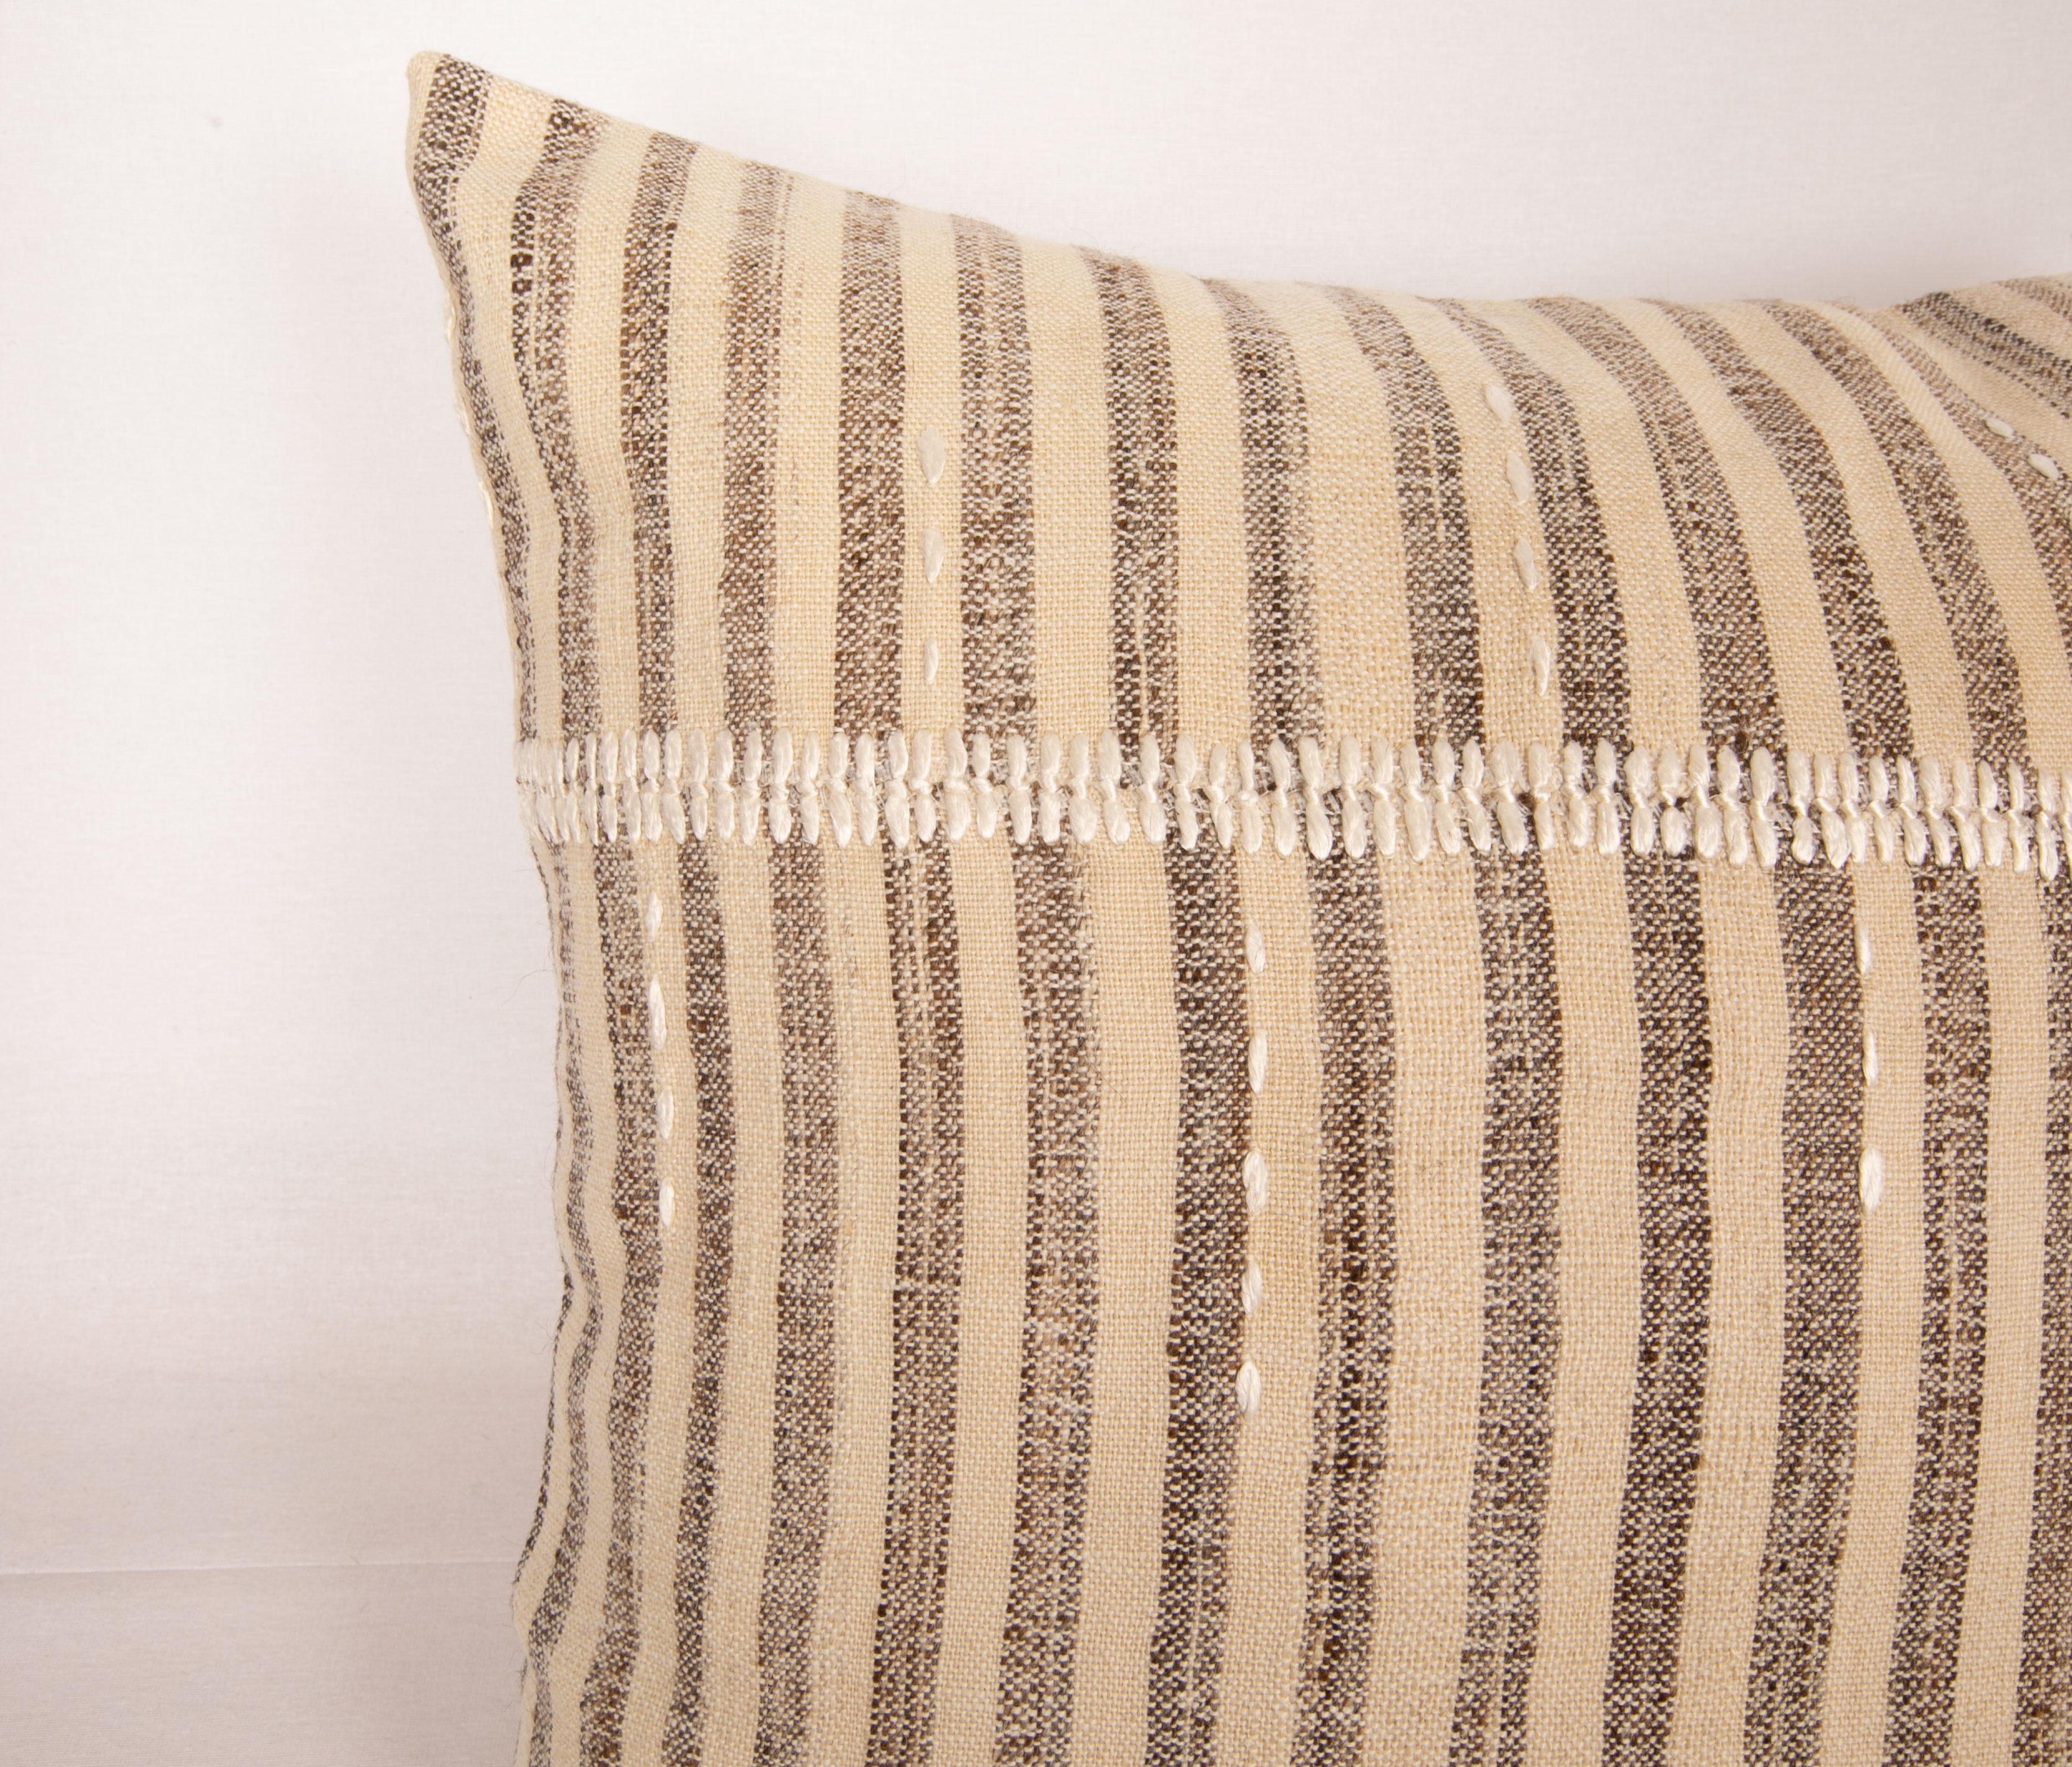 Hand-Woven Pillow Case Made from Rustic Anatolian Vintage Kilim